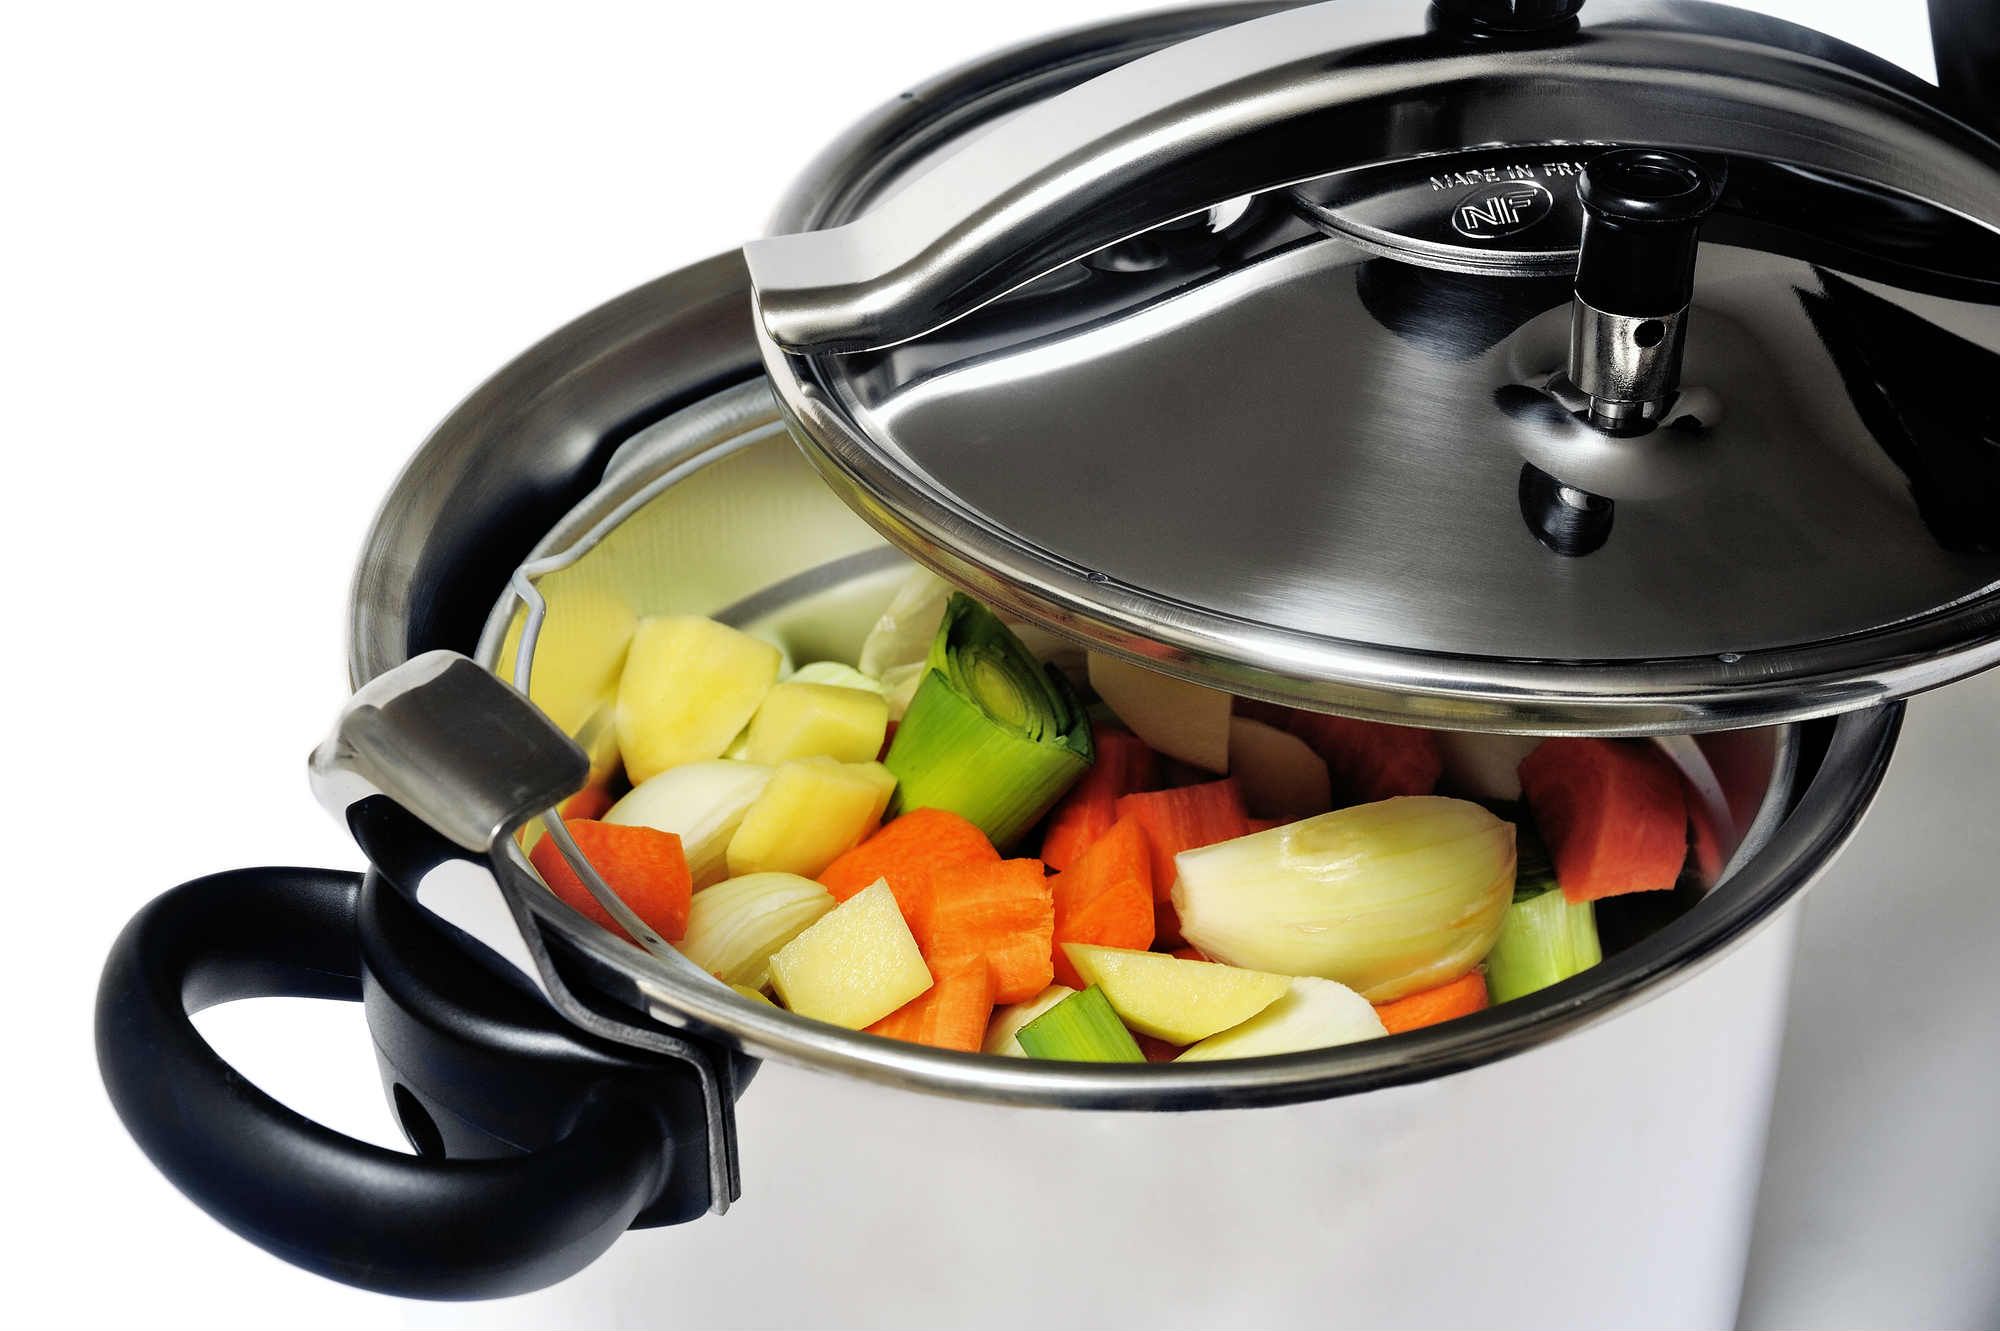 Cuisinart Electric Pressure Cooker Explosions Allegedly Caused by Defects -  Top Class Actions